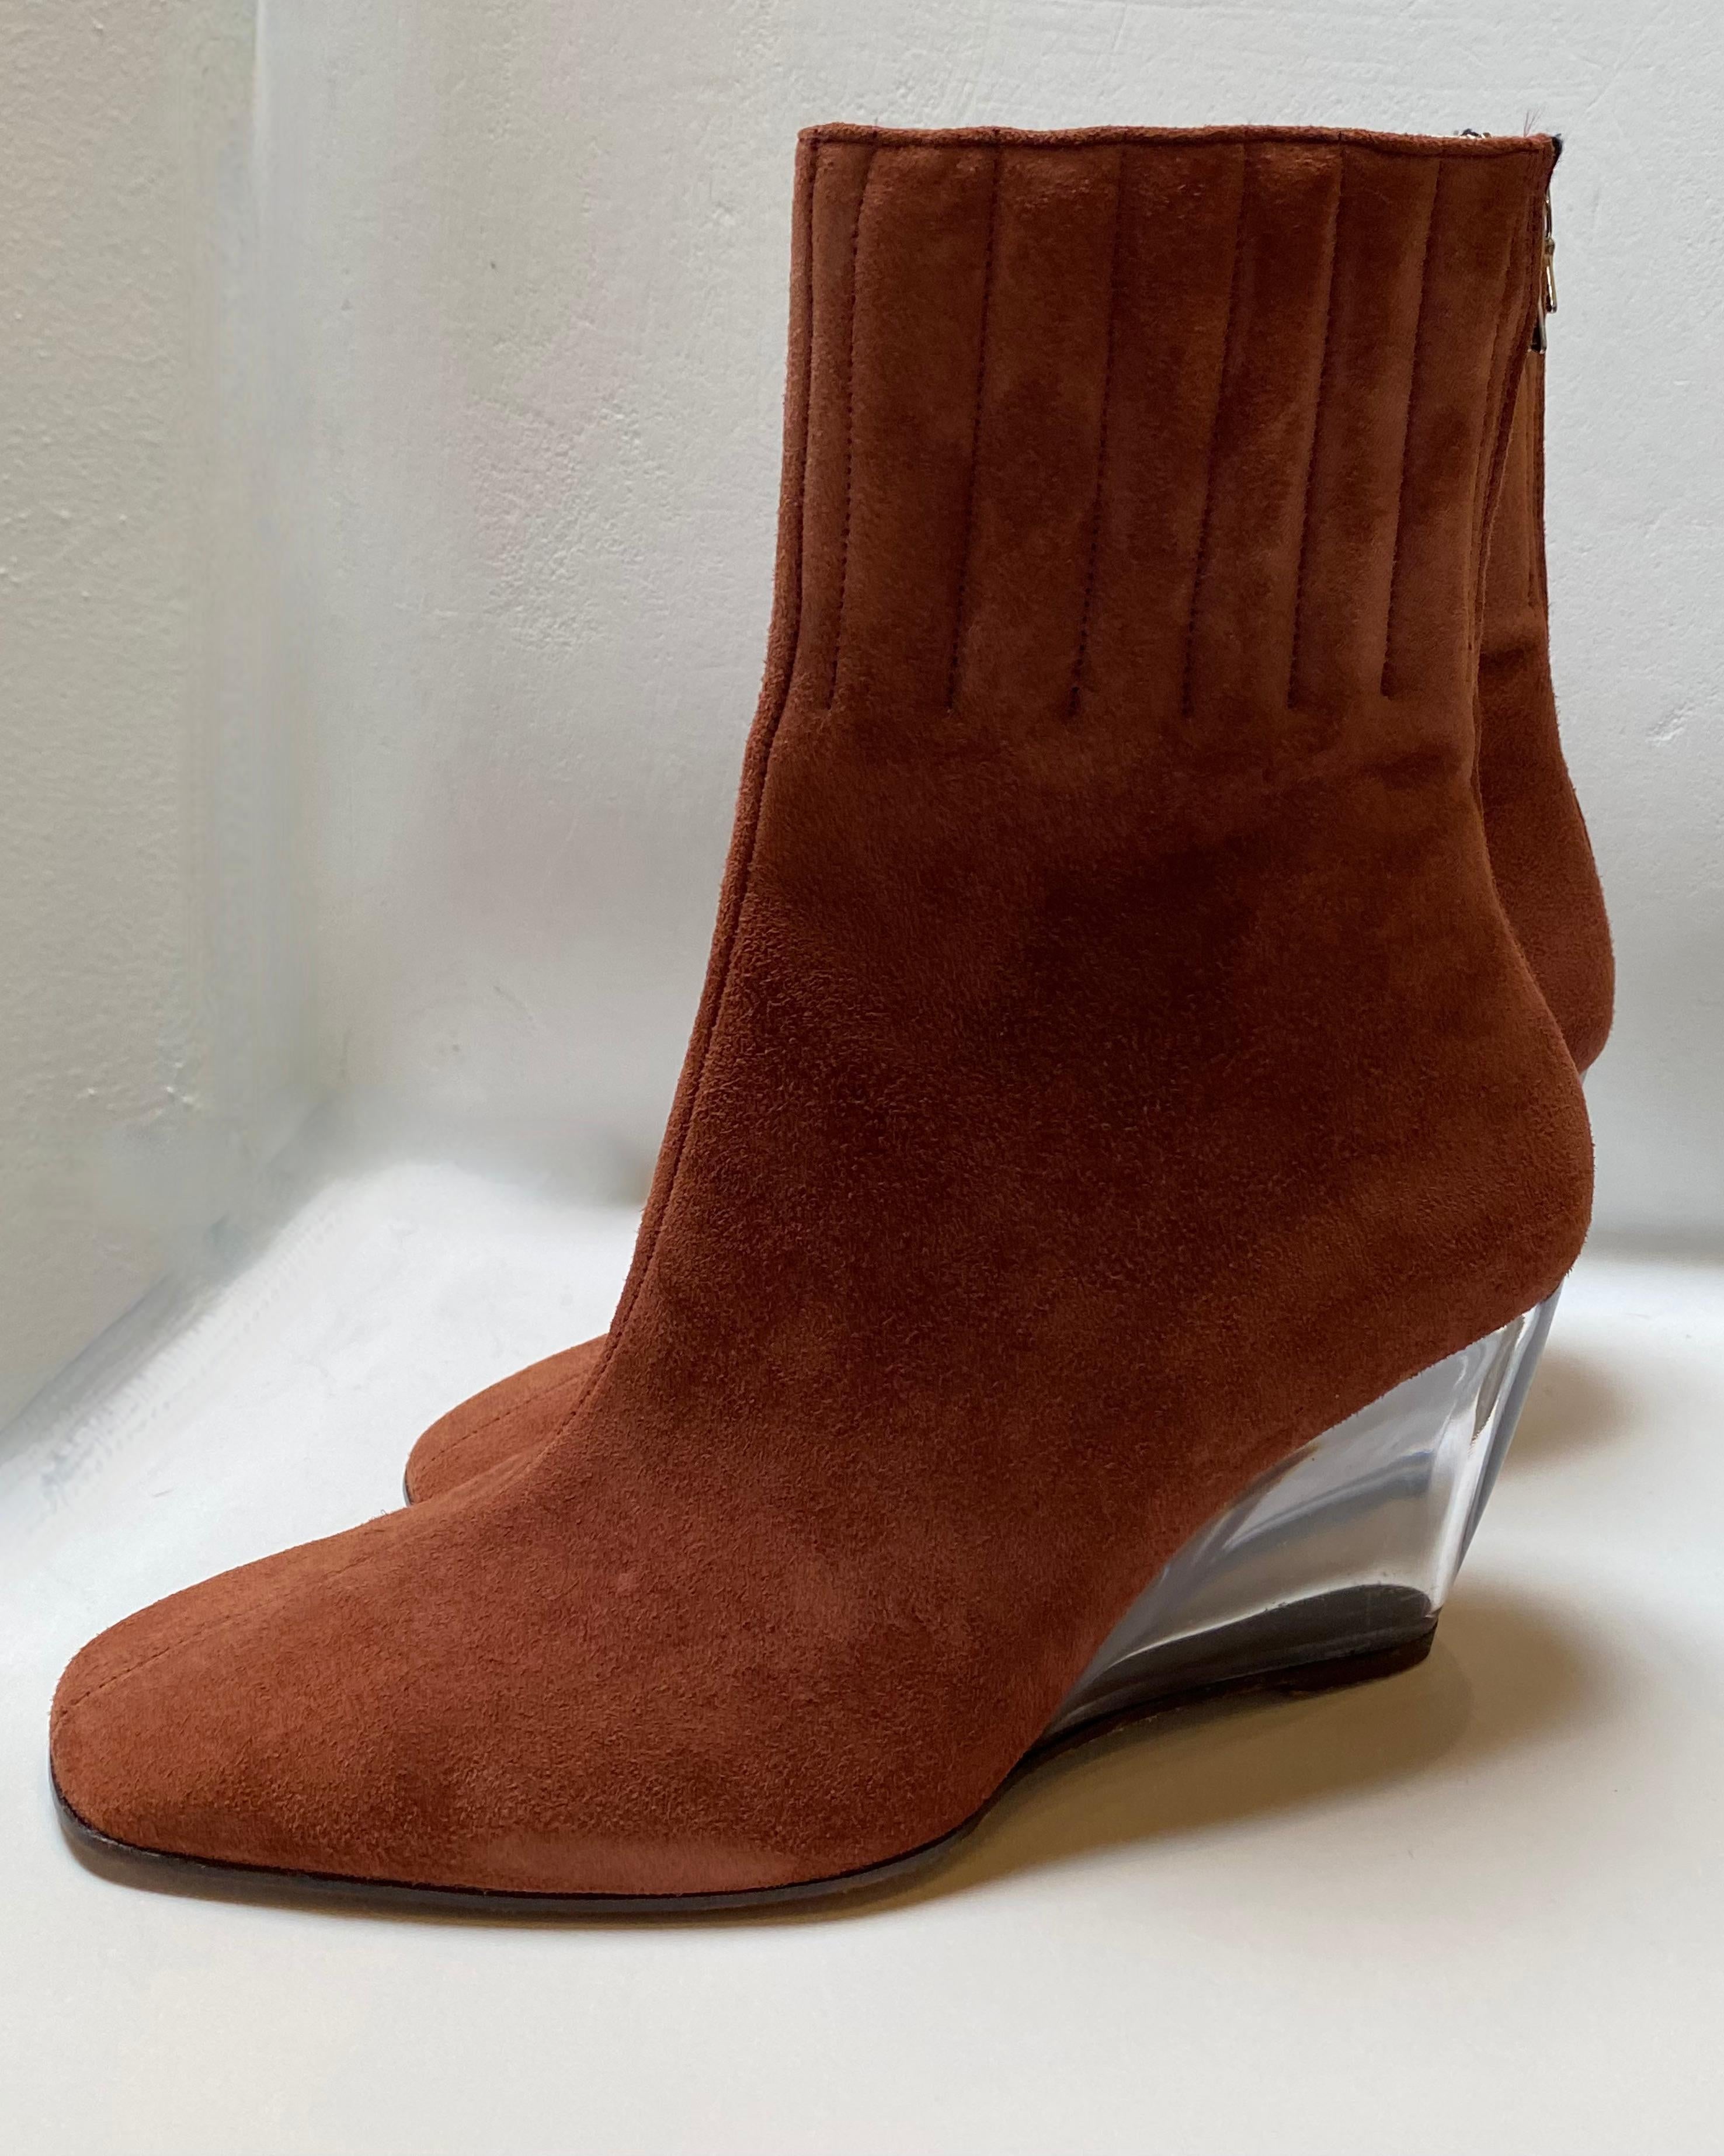 Brown Courreges Suede Ankle Boot with Plexi Heel For Sale